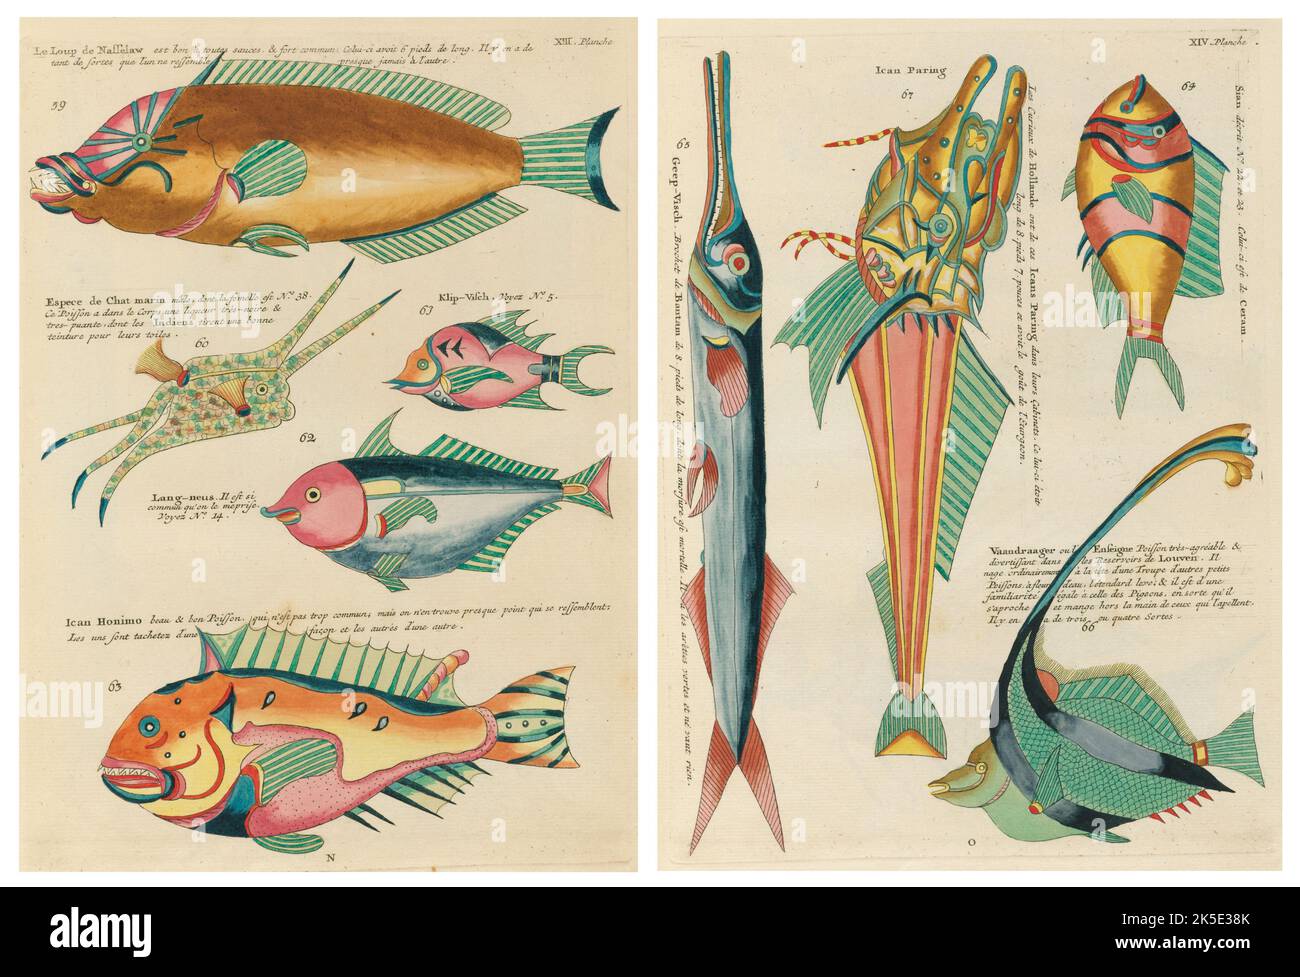 Antique illustrations of Fish, Crab and Crayfish with annotations in French.From Louis Renard's Poissons, Ecrevisses et Crabes, published in 1754. Coloured copper engravings organished as 2 pages from the original title laid side-by-side. Stock Photo